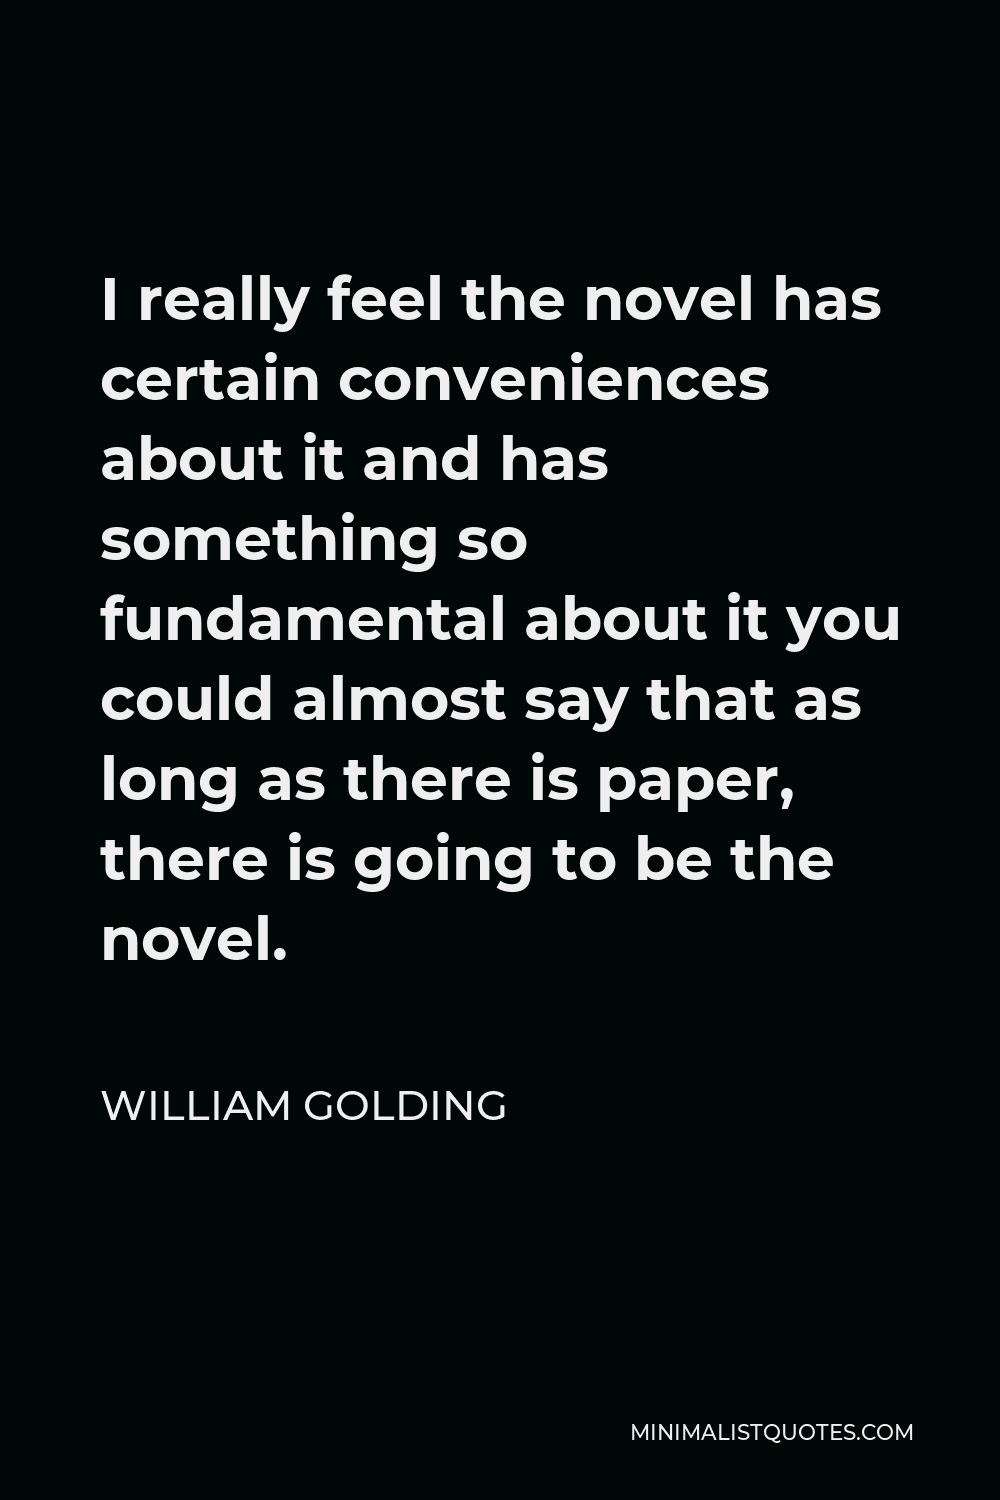 William Golding Quote - I really feel the novel has certain conveniences about it and has something so fundamental about it you could almost say that as long as there is paper, there is going to be the novel.